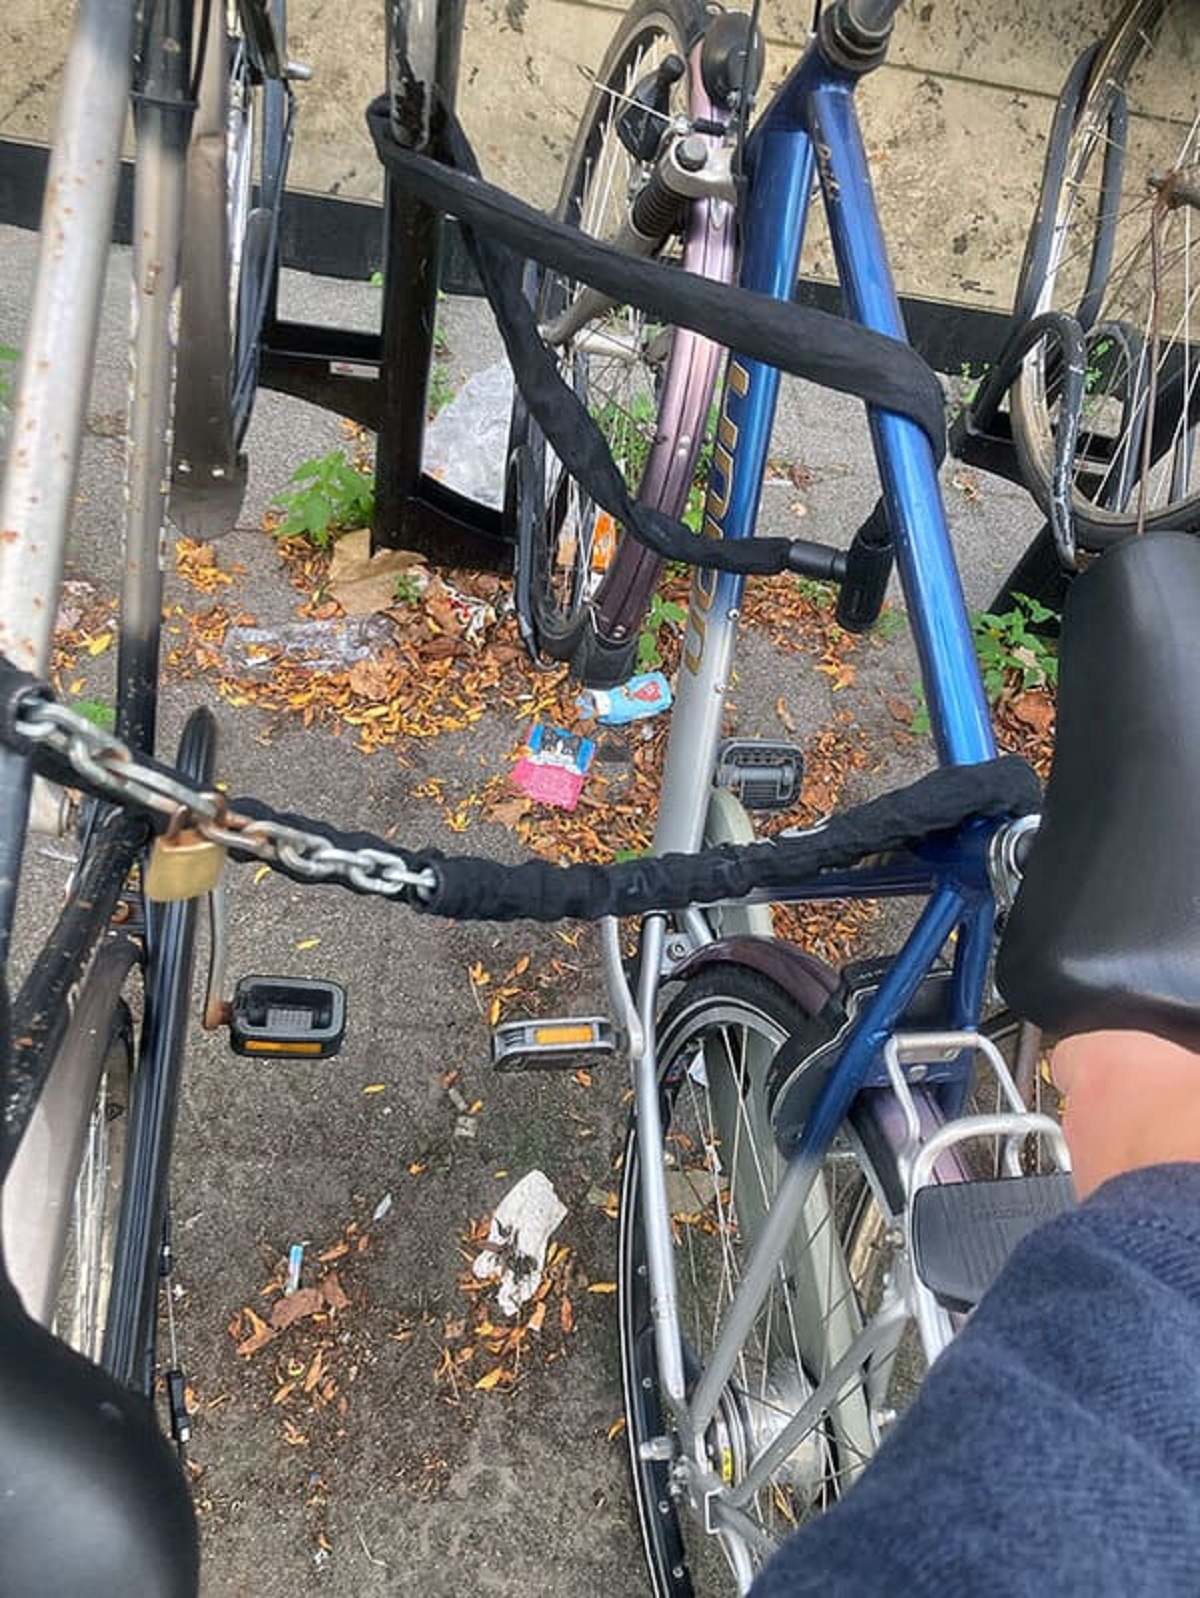 “Someone Locked His Bike On My Bike Without Even Trying To Lock It To The Stand”